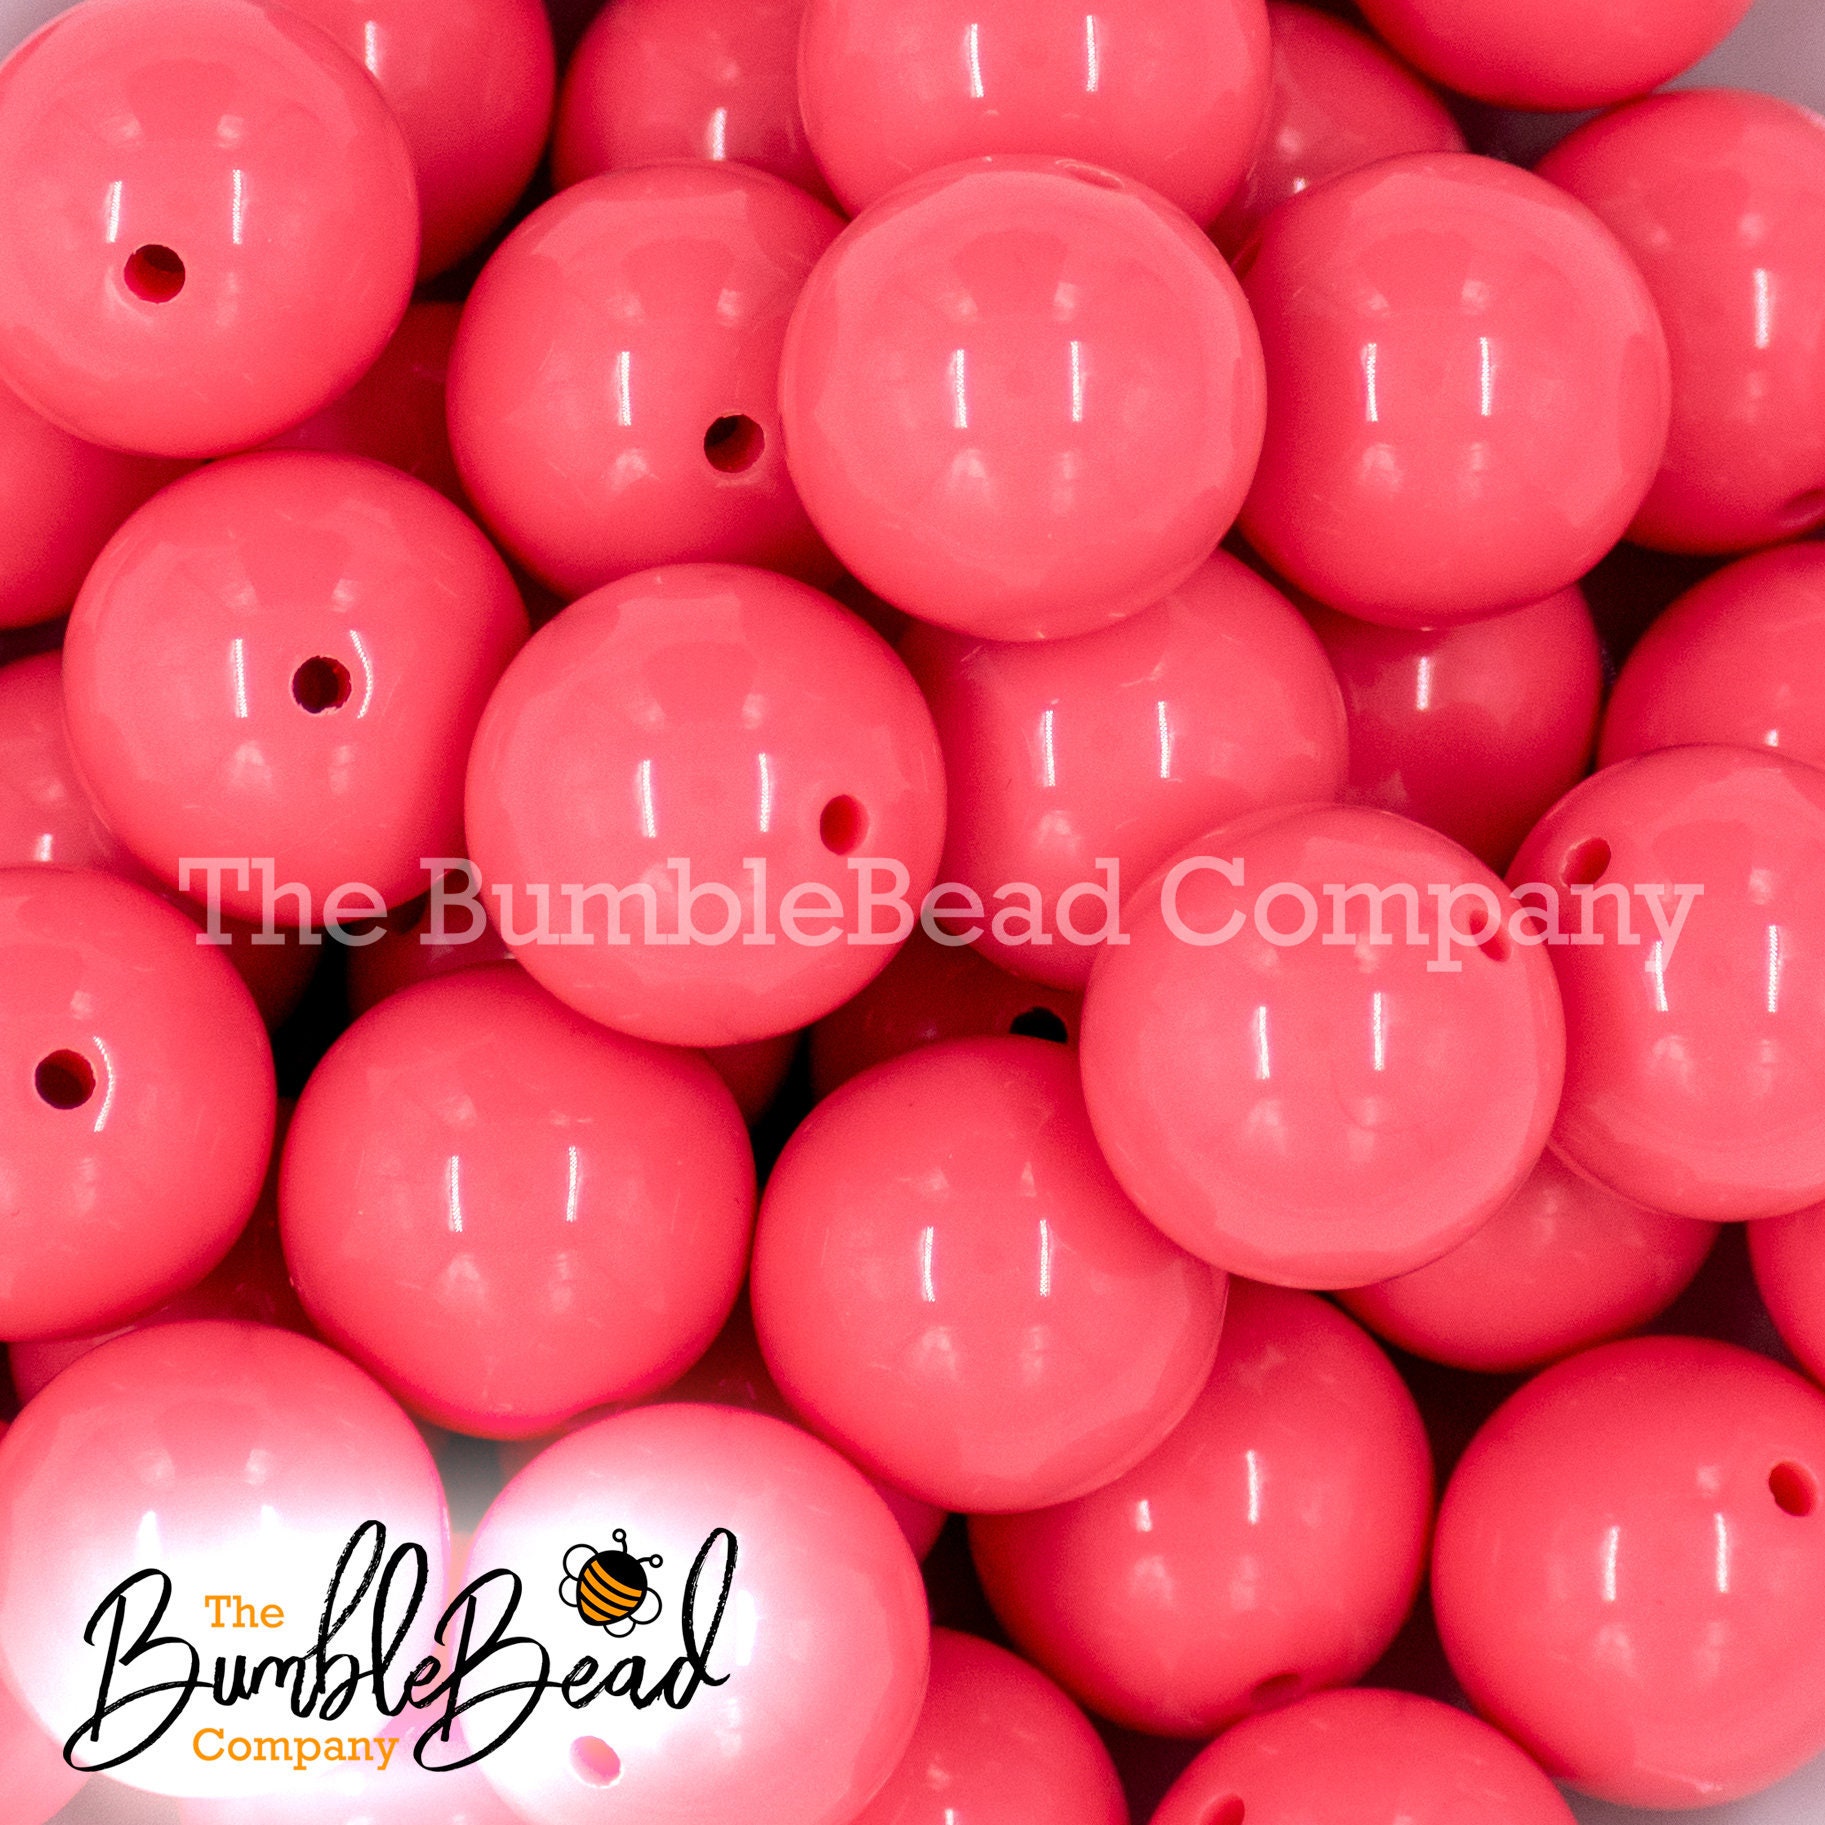 CYEENUT 20mm Bubblegum Beads for Pens, 20mm Beads for Pens Making Bulk, Pen  Beads Charms 20mm Bulk, 20mm Beads for Bead Pens, Large Chunky Beads